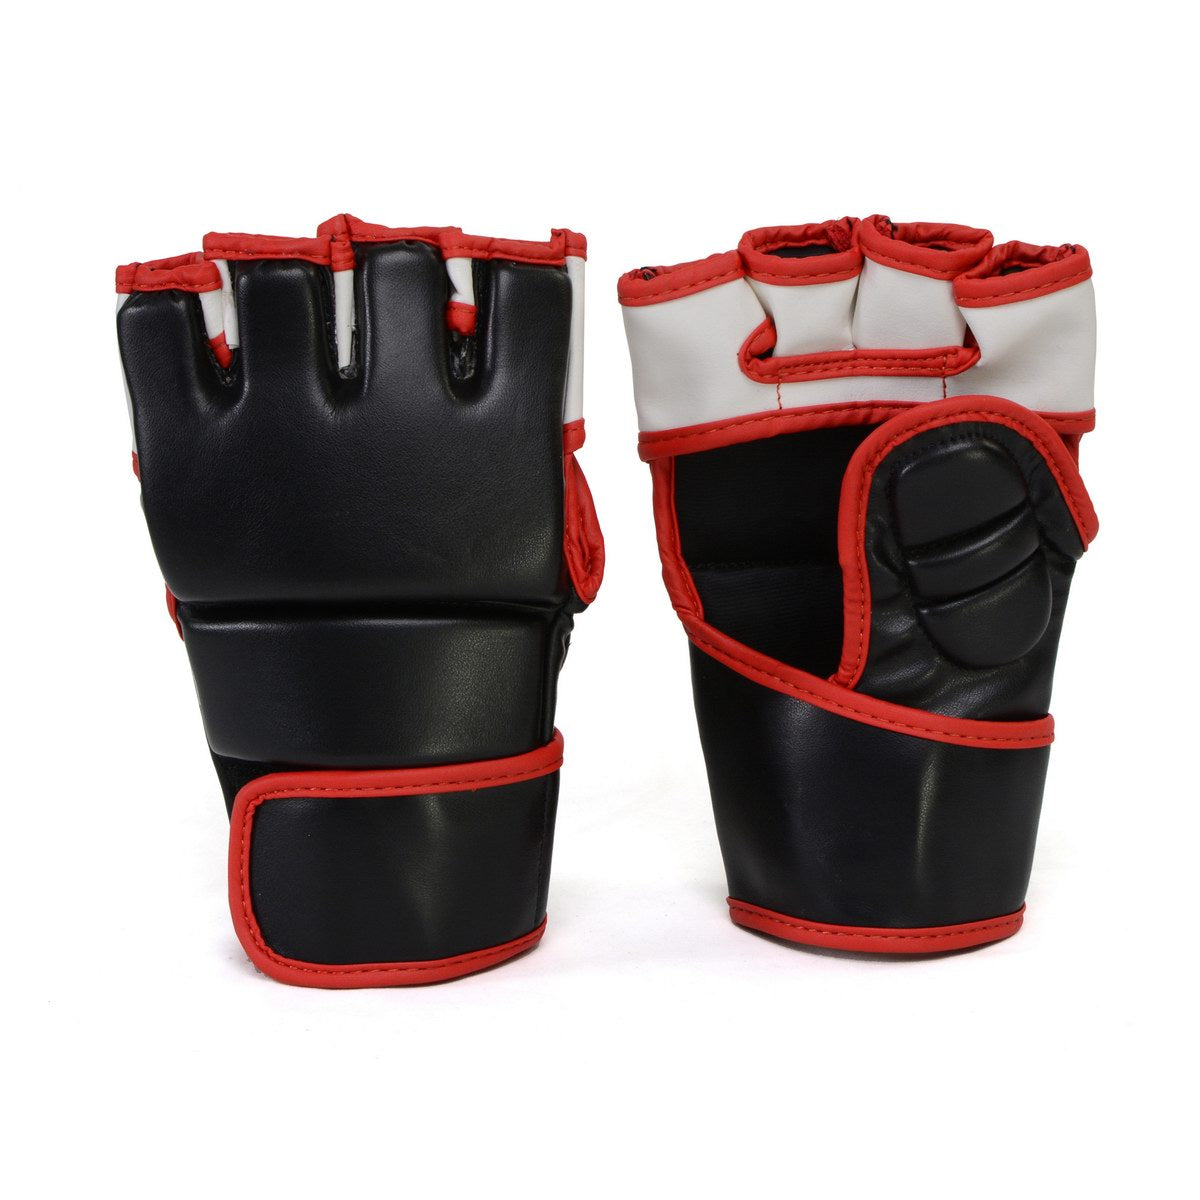 X-Fitness XF2002 MMA Grappling Gloves-BLK/RED